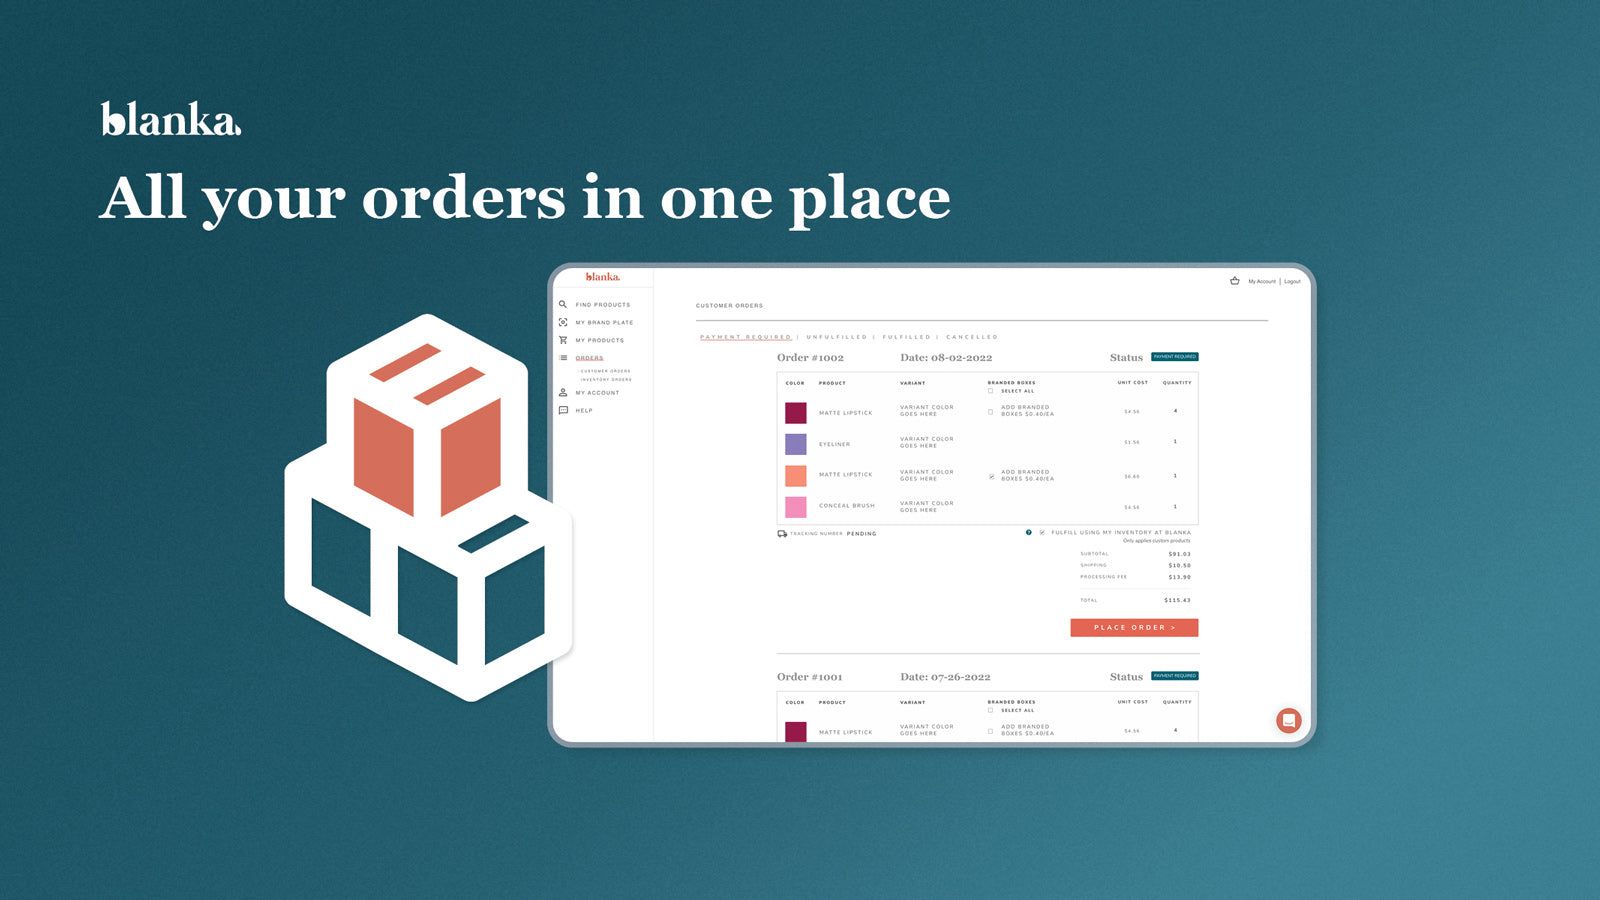 All your orders in one place. Easy to navigate to stay organized